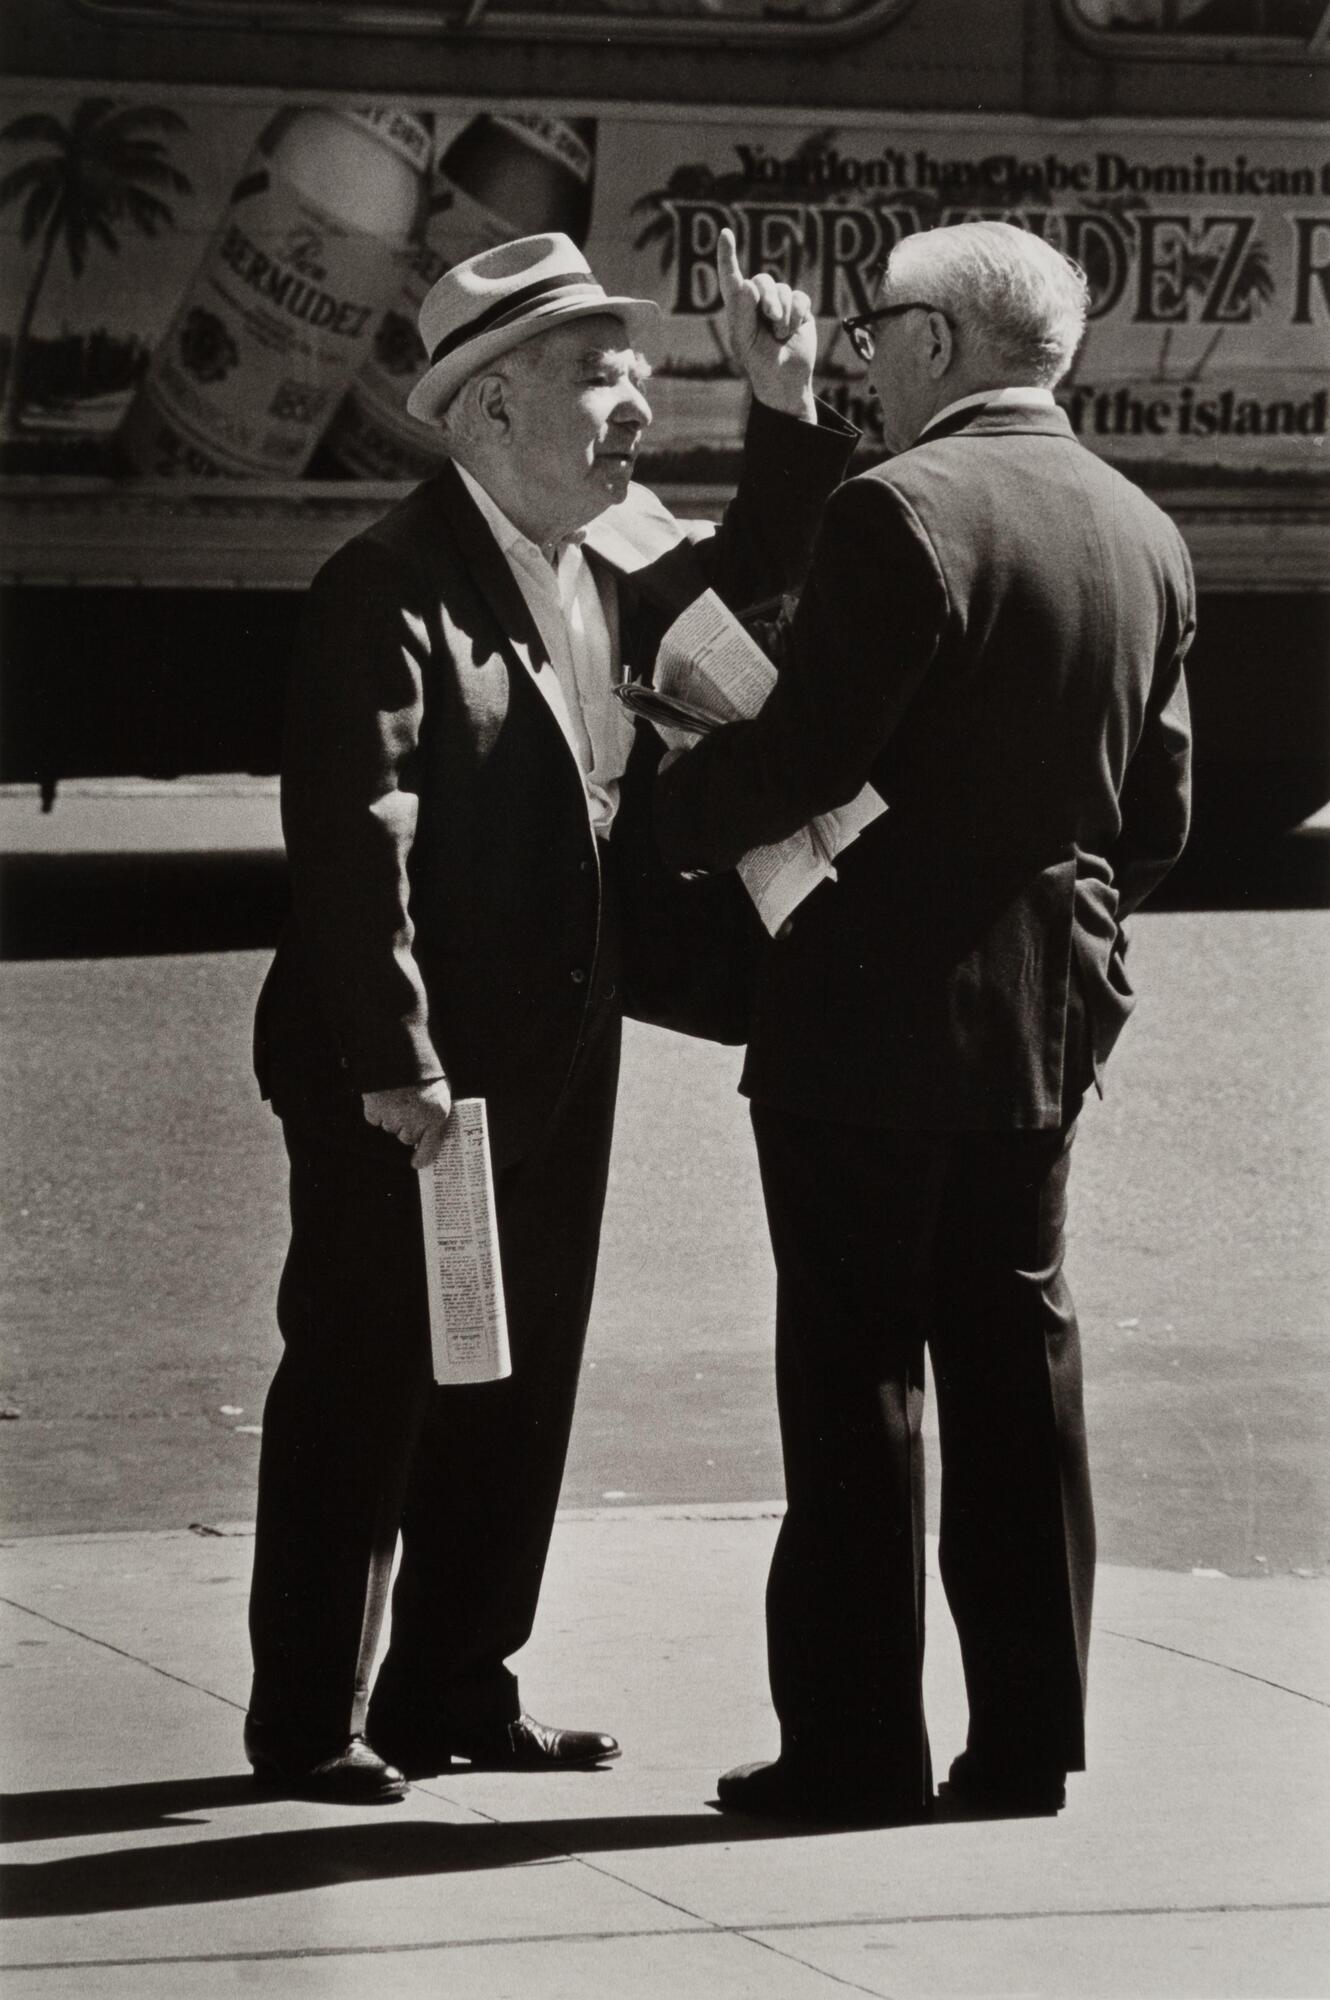 Two men in suits on a sidewalk, both holding newspapers, one his holding a hand up, they are in the middle of a conversation.